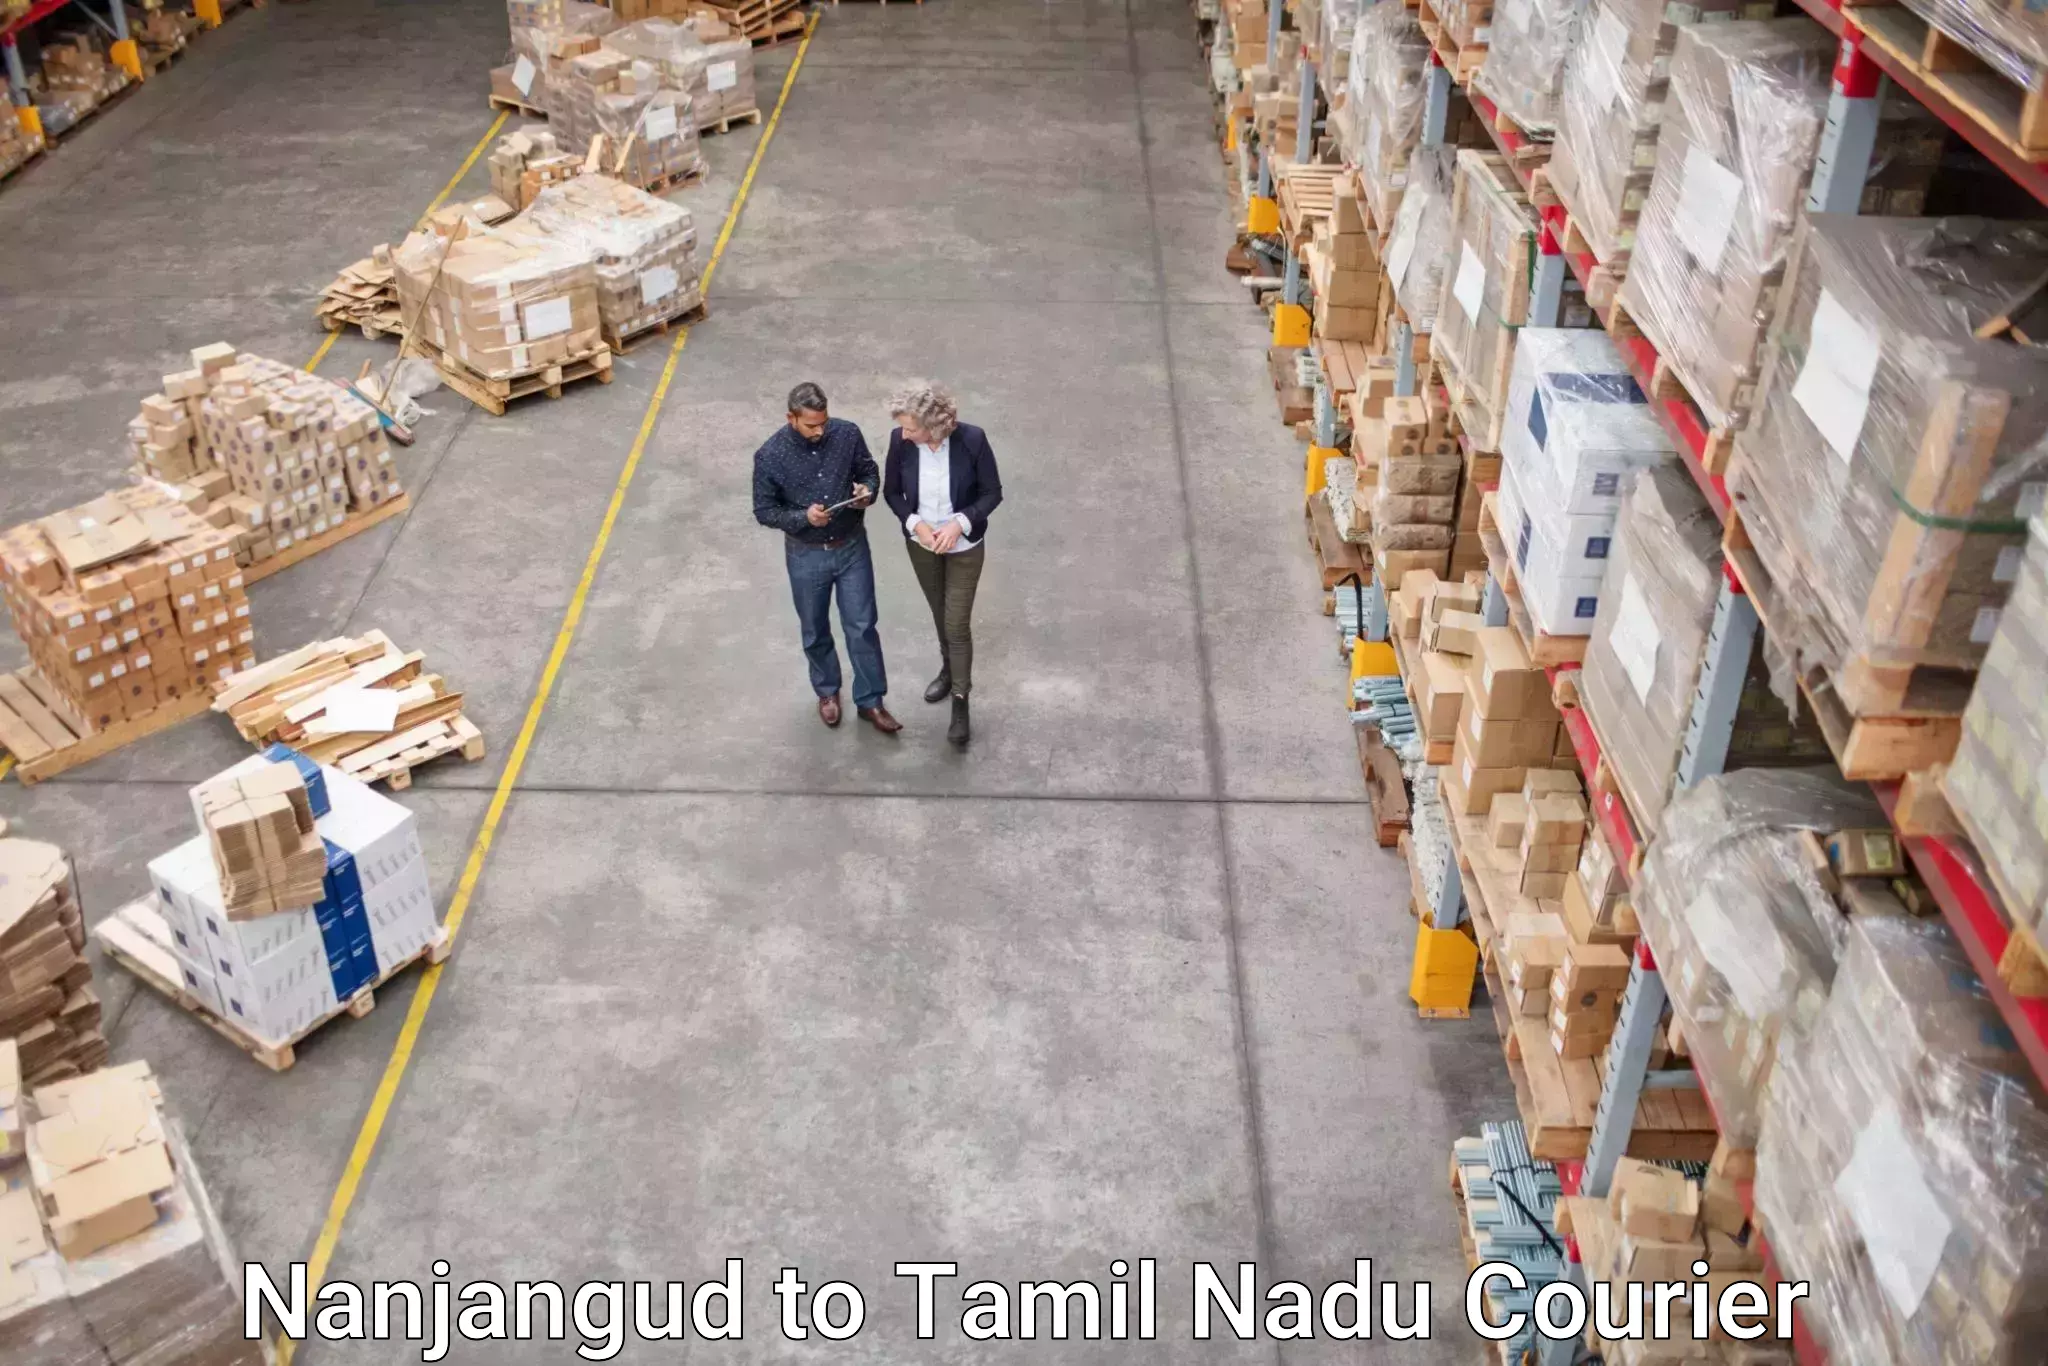 Quality courier services Nanjangud to Chennai Port